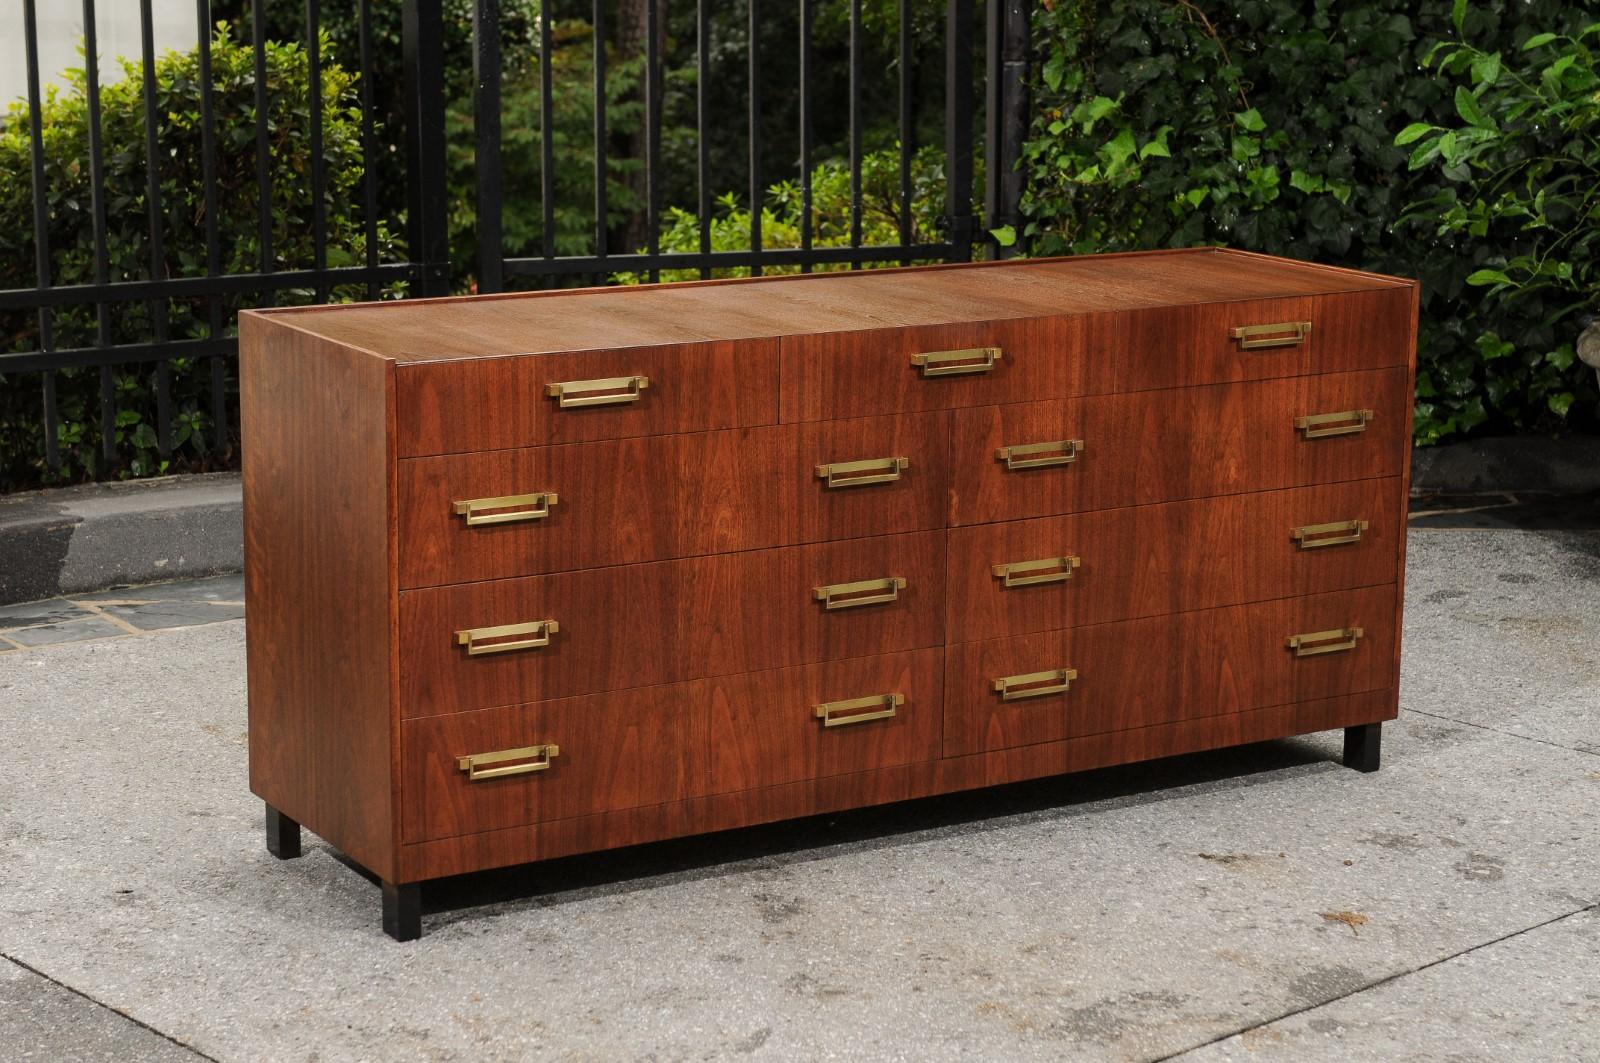 This magnificent chest is shipped as professionally photographed and described in the listing narrative: Meticulously professionally restored and completely installation ready.

Michael Taylor's fabulous modern interpretation of the classic